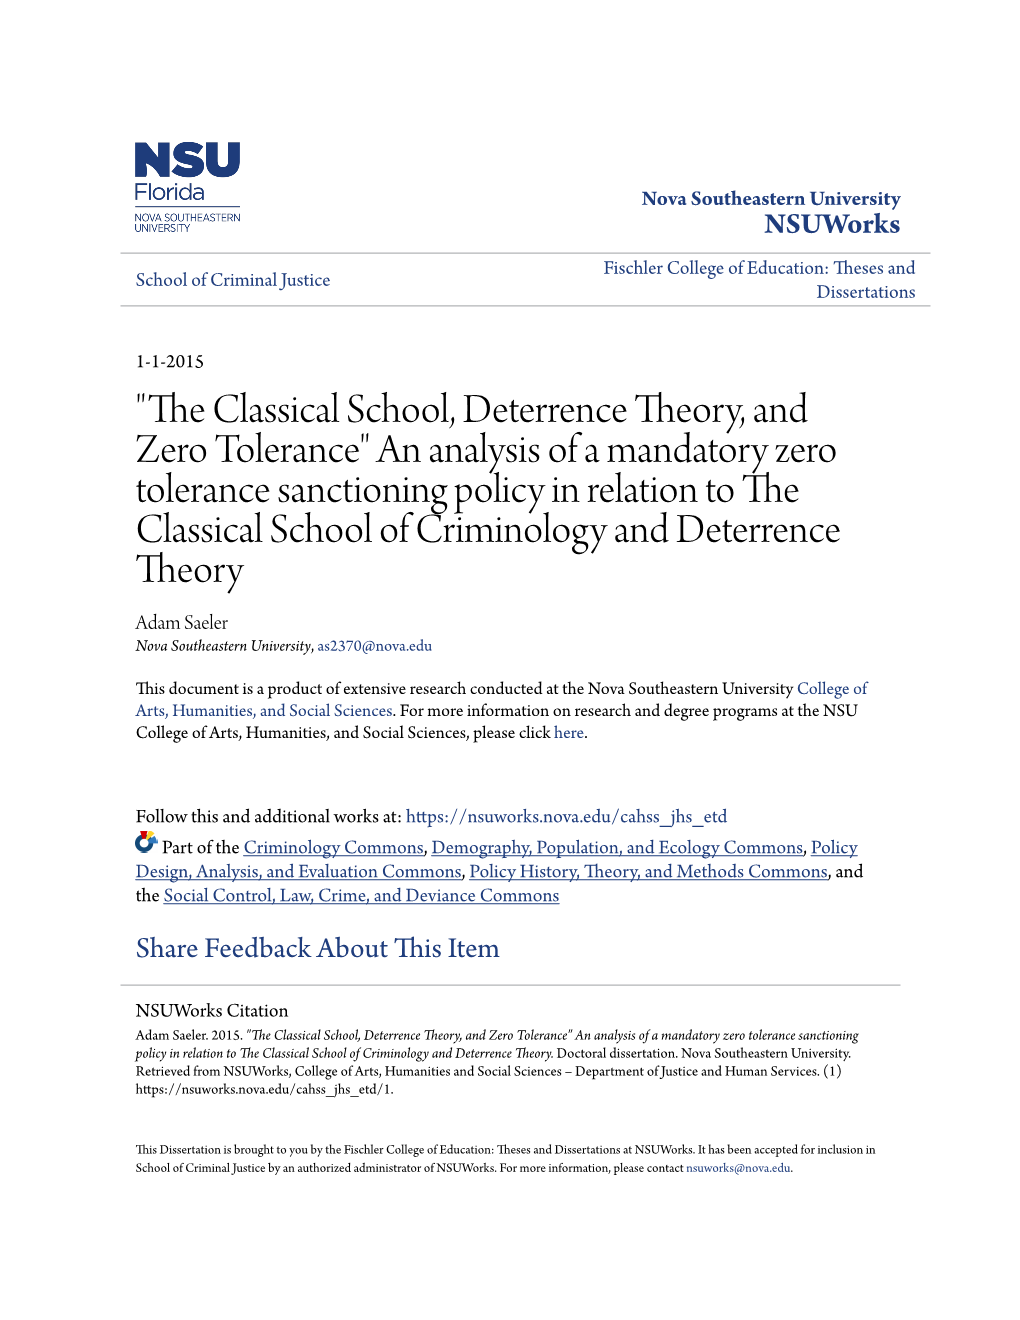 The Classical School, Deterrence Theory, and Zero